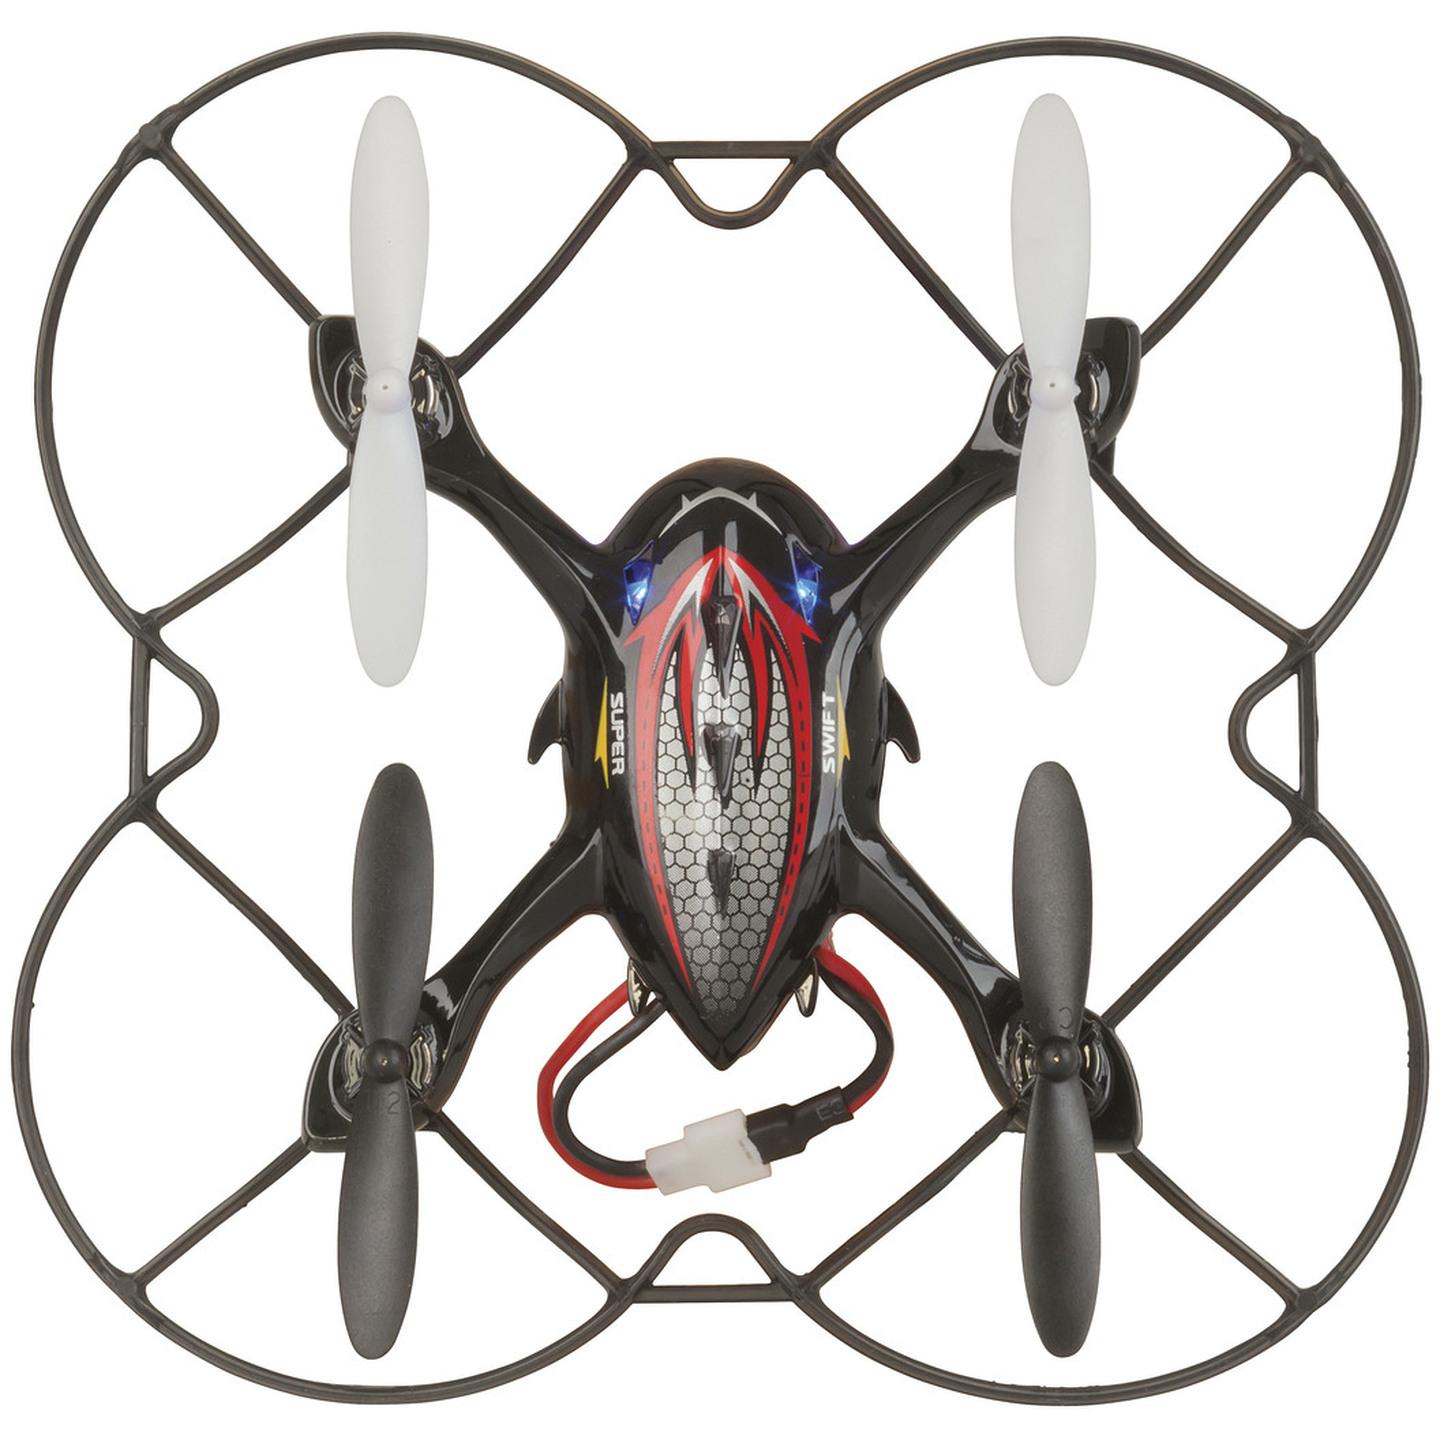 4 Channel Mini Quadcopter with Video Recorder